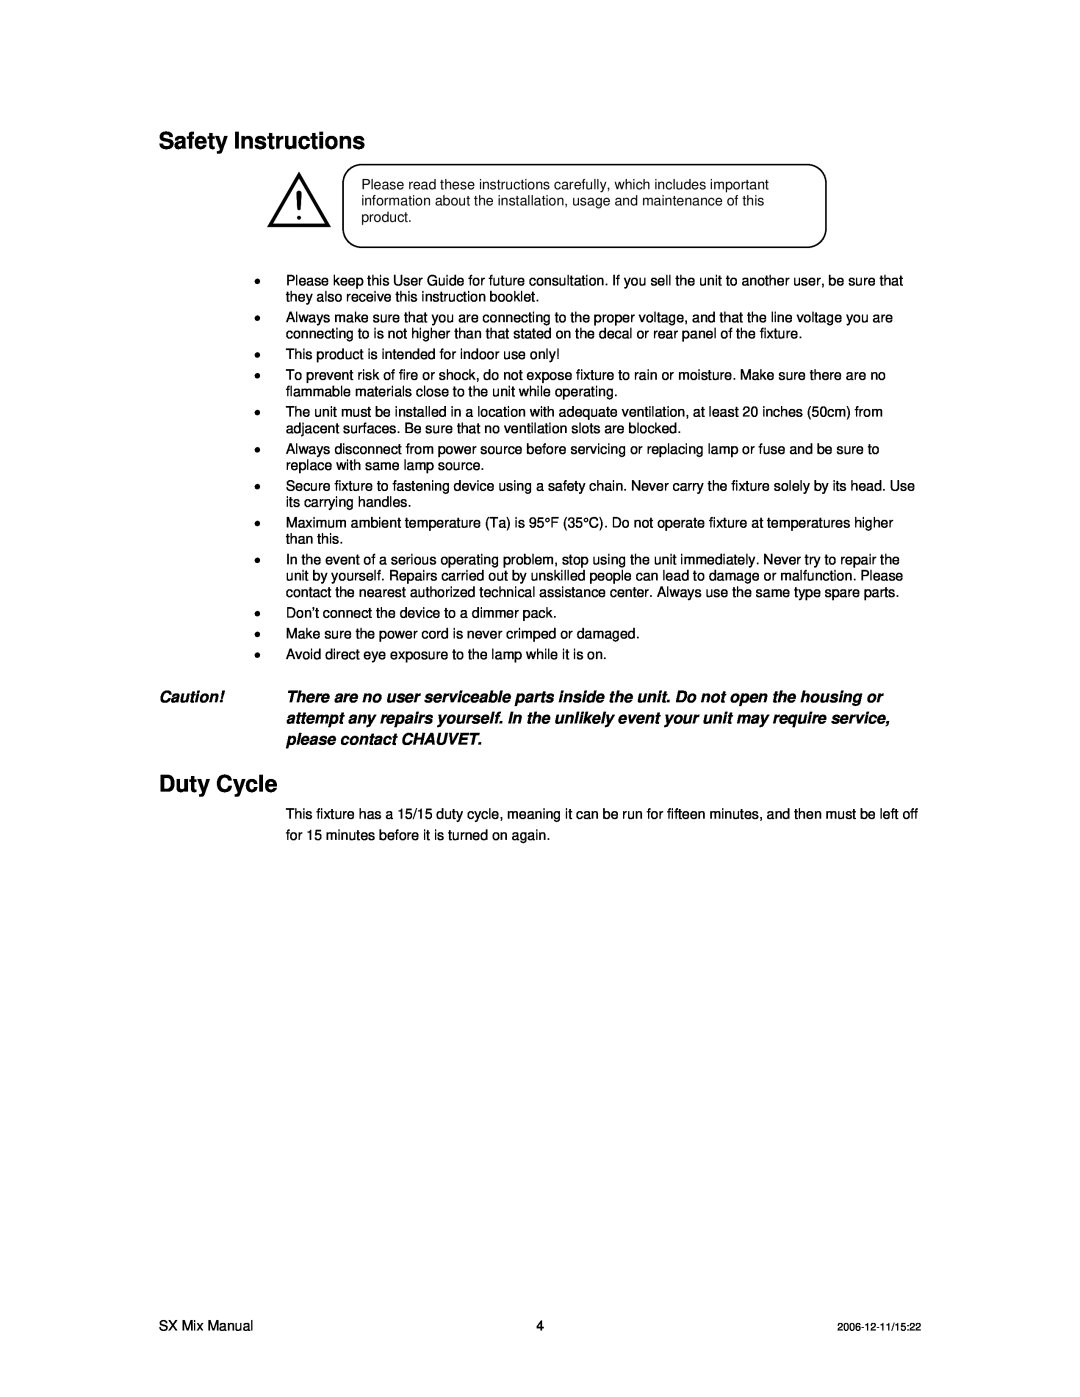 Chauvet DMX512 user manual Safety Instructions, Duty Cycle 